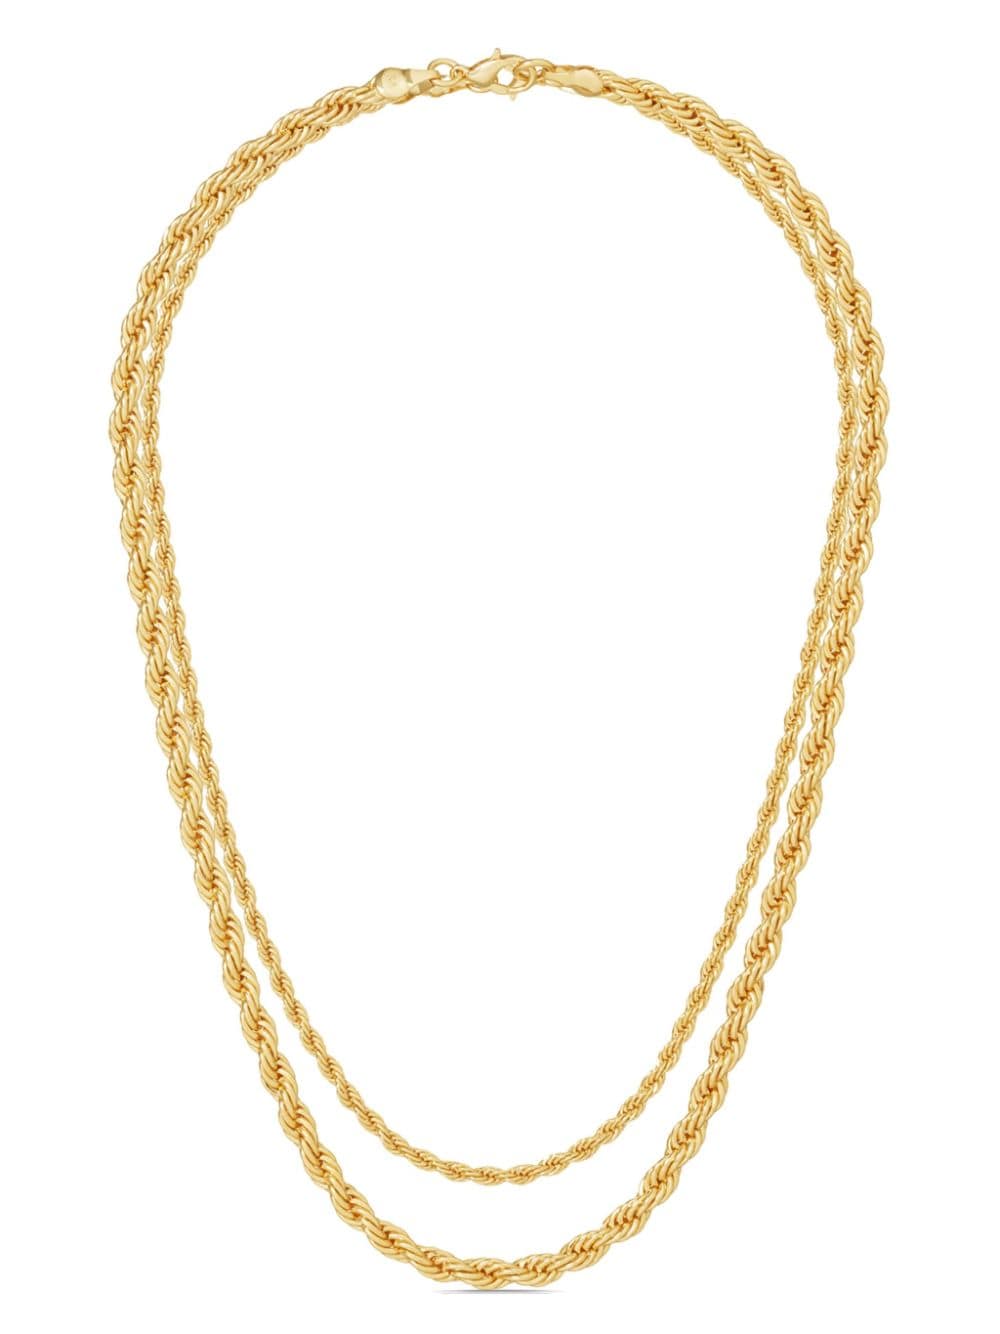 Roxanne Assoulin On The Ropes necklaces (set of two) - Gold